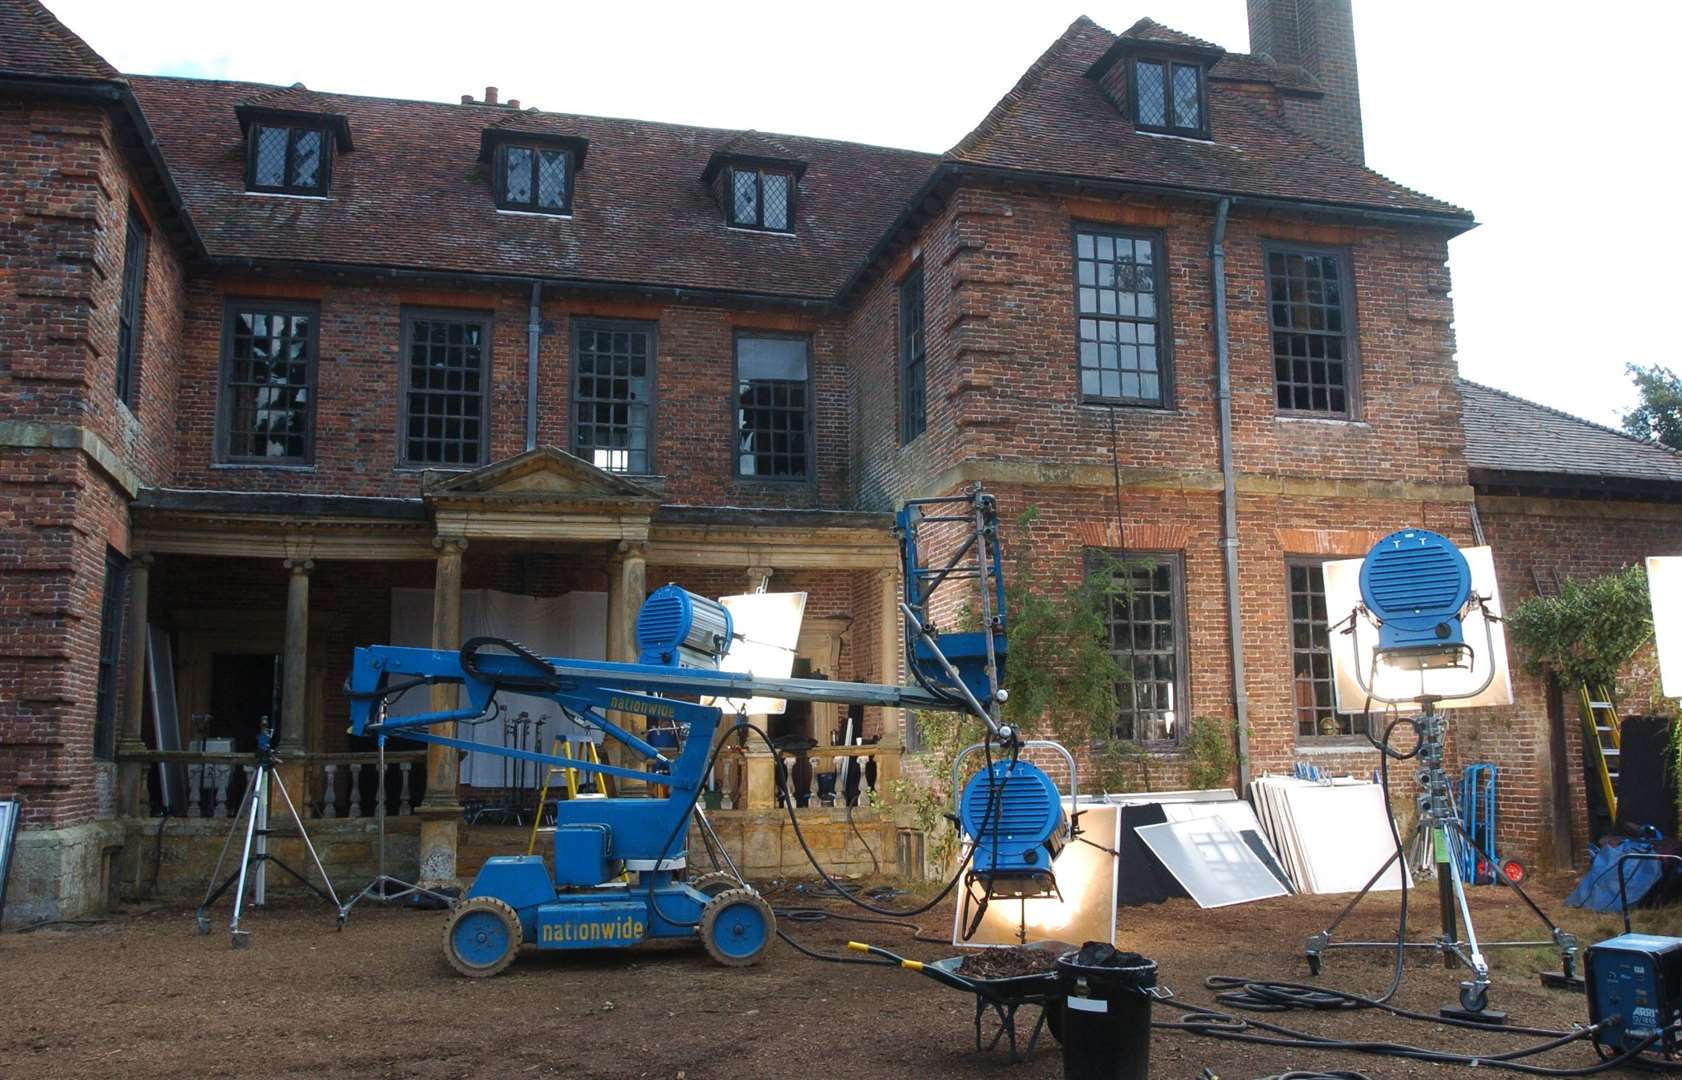 Groombridge Place during the filming of Pride and Prejudice. Picture: Matthew Walker